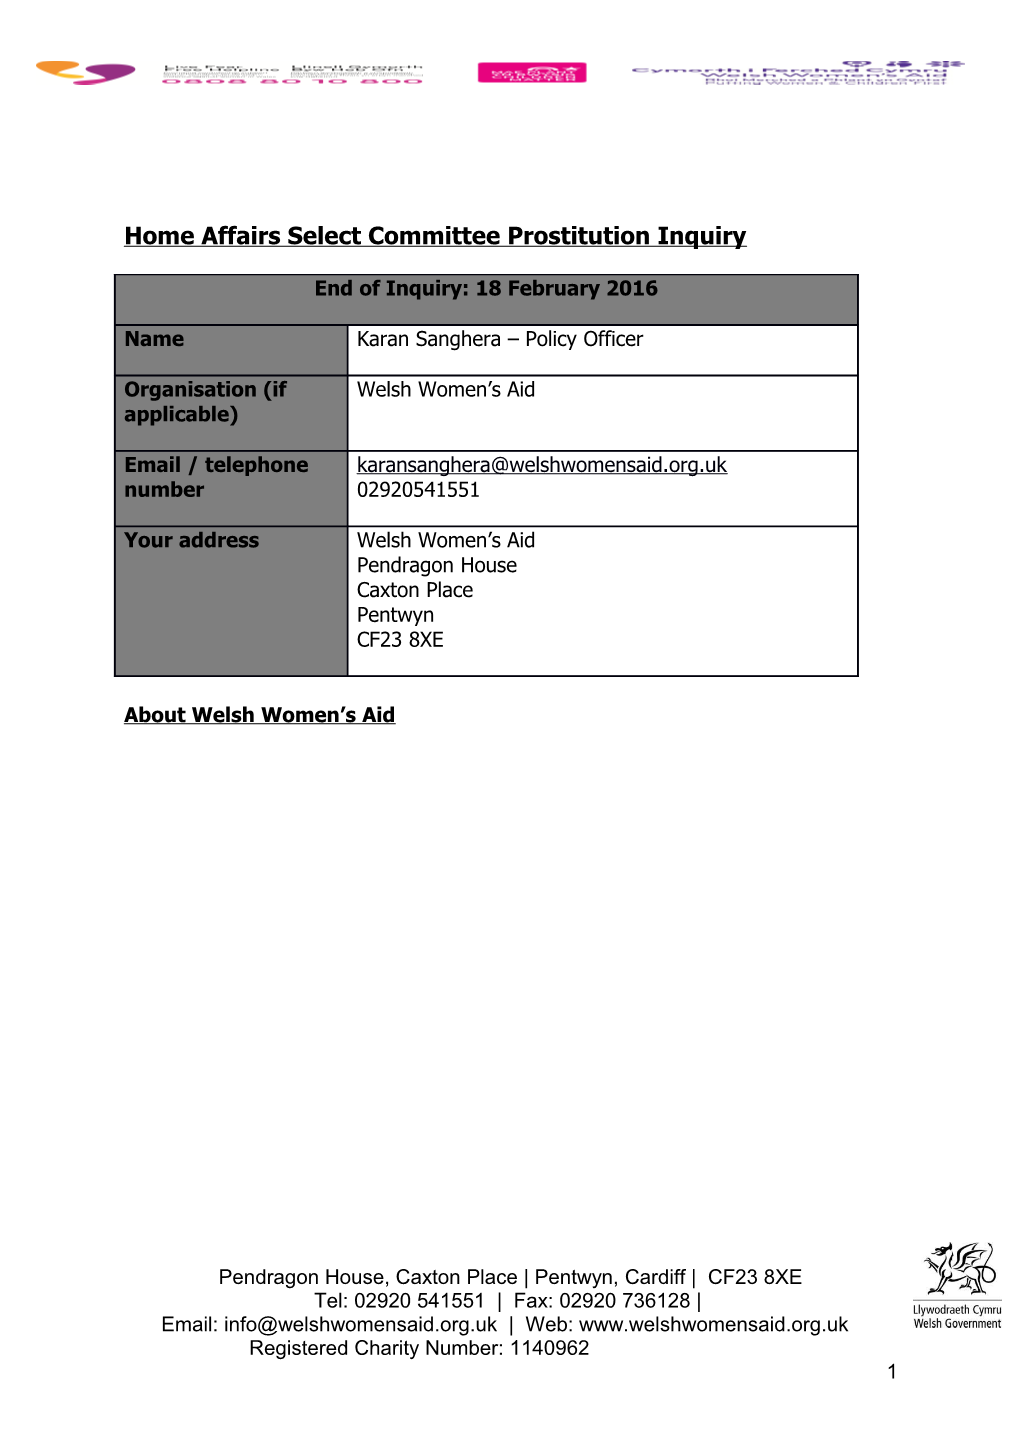 Home Affairs Select Committee Prostitution Inquiry